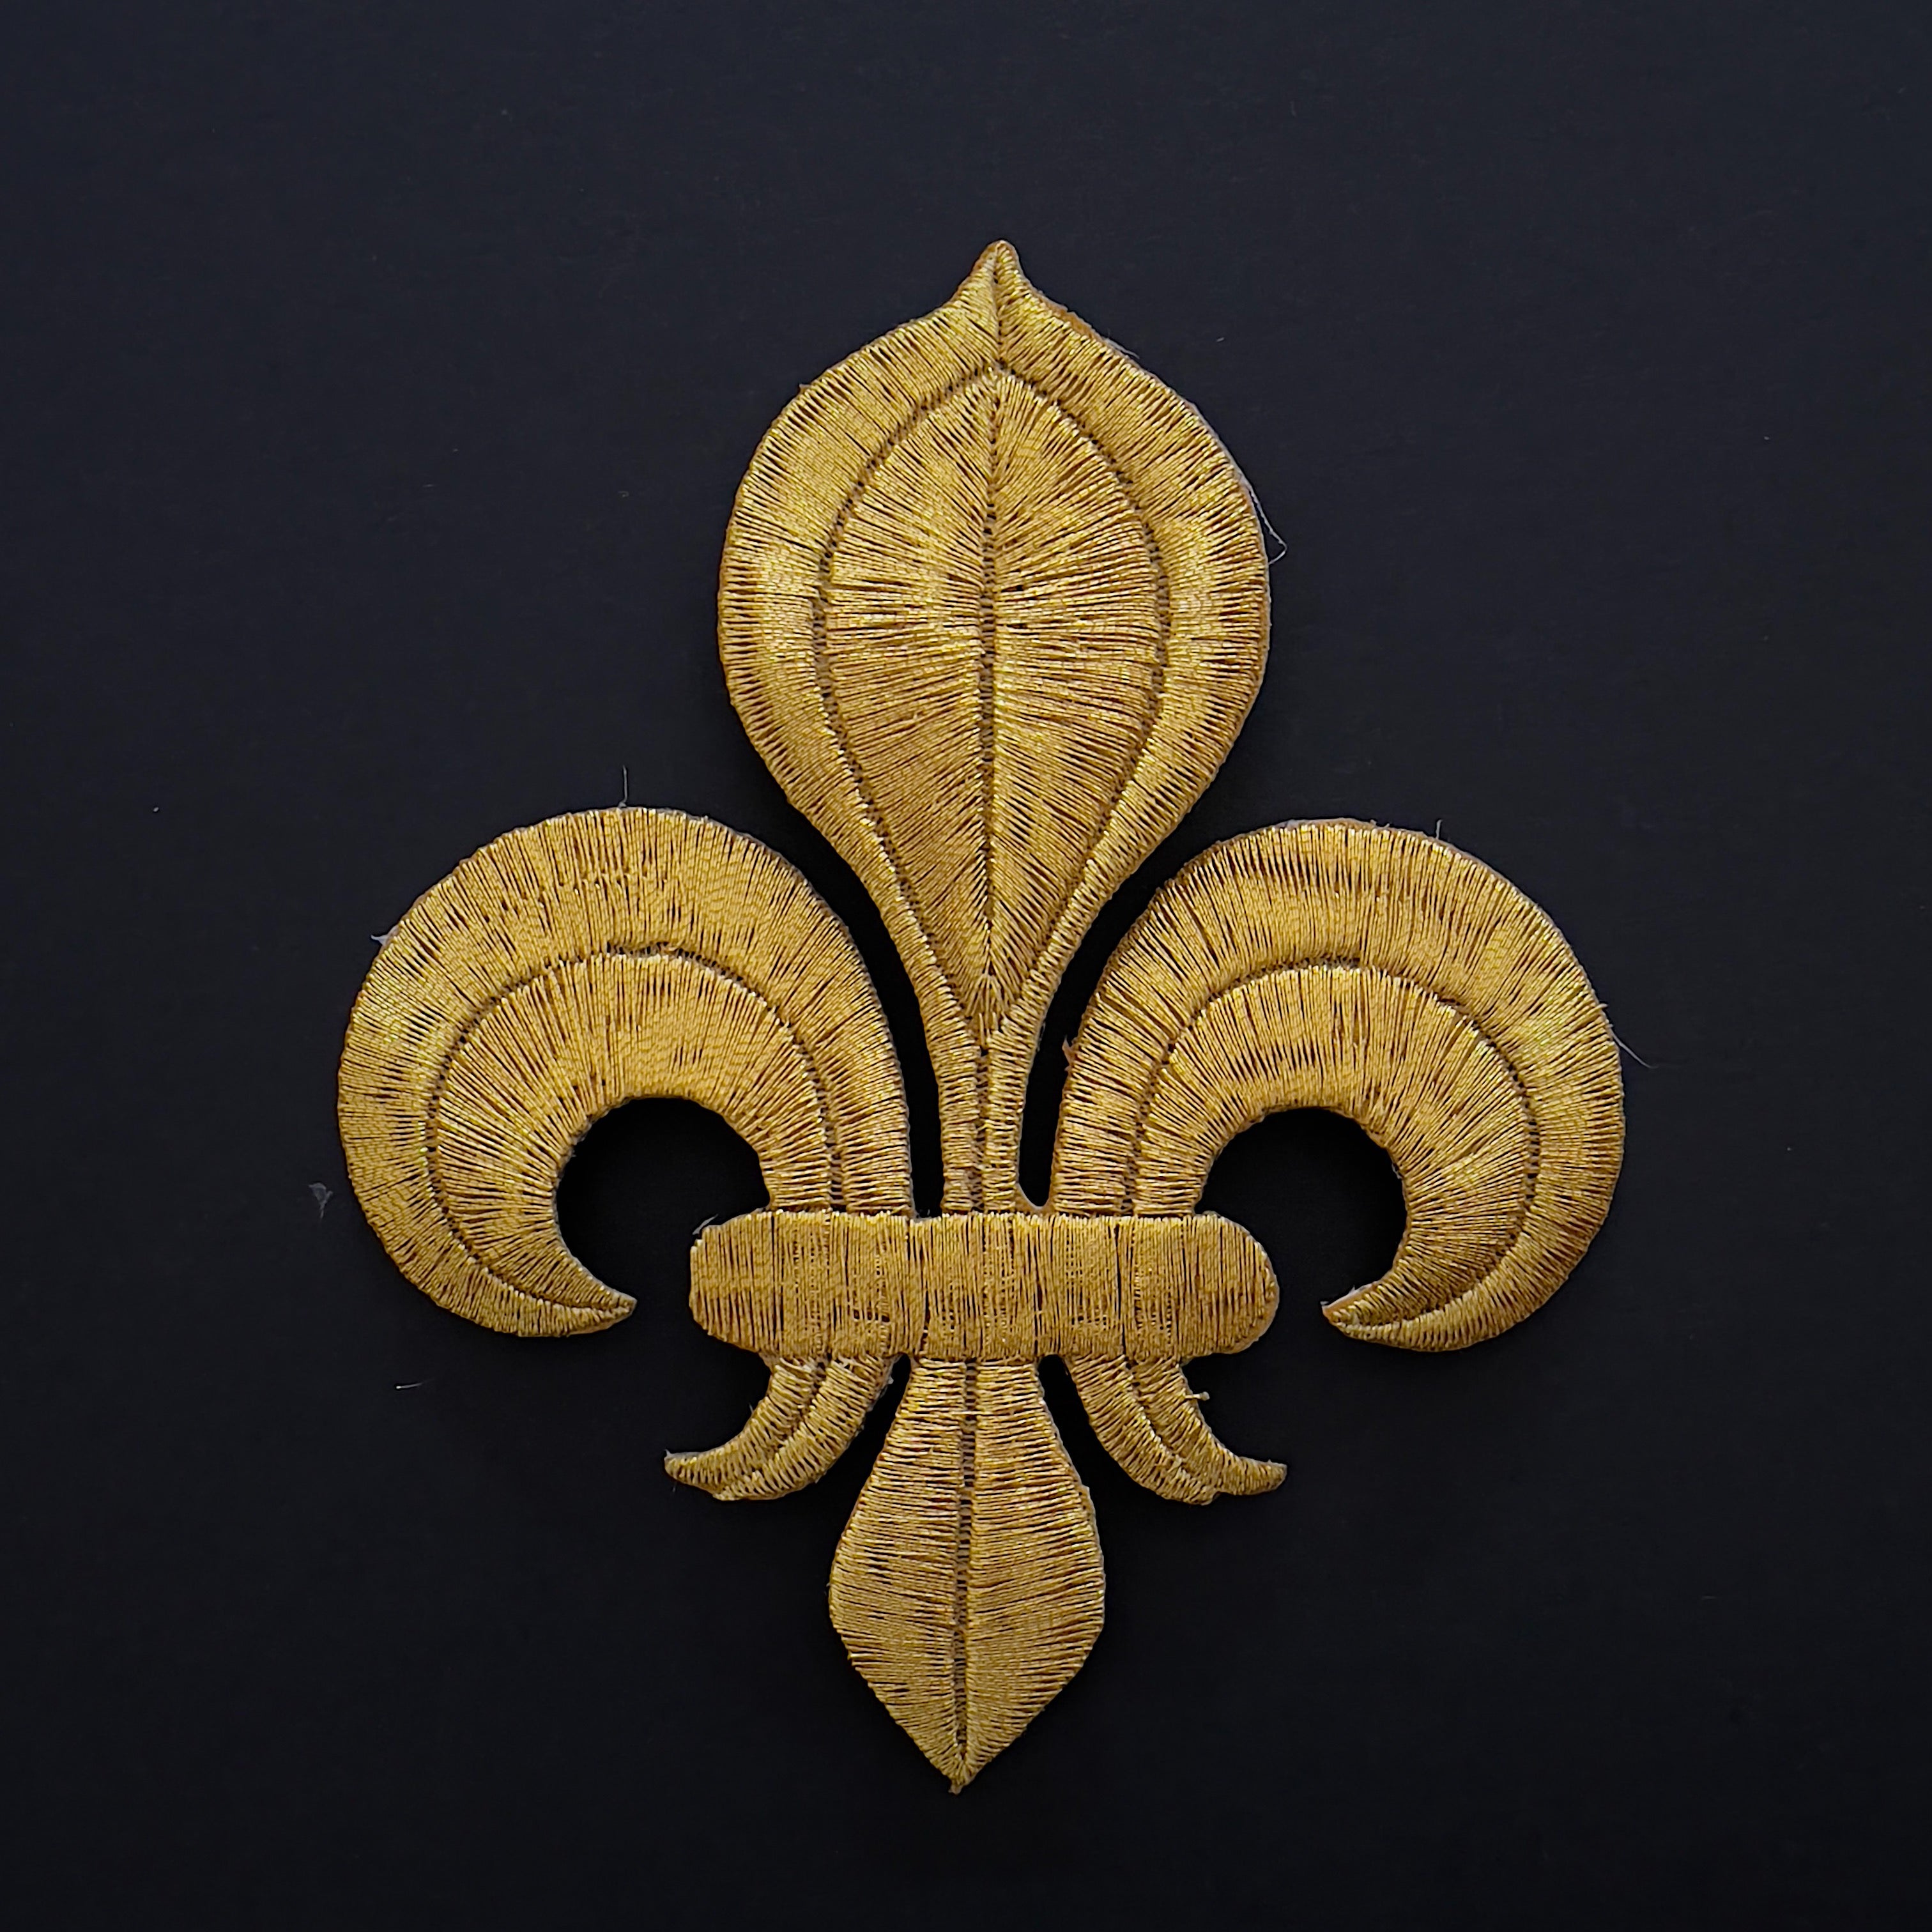 Gold fleur de lis applique embroidered with metallic thread laying flat on a black background.